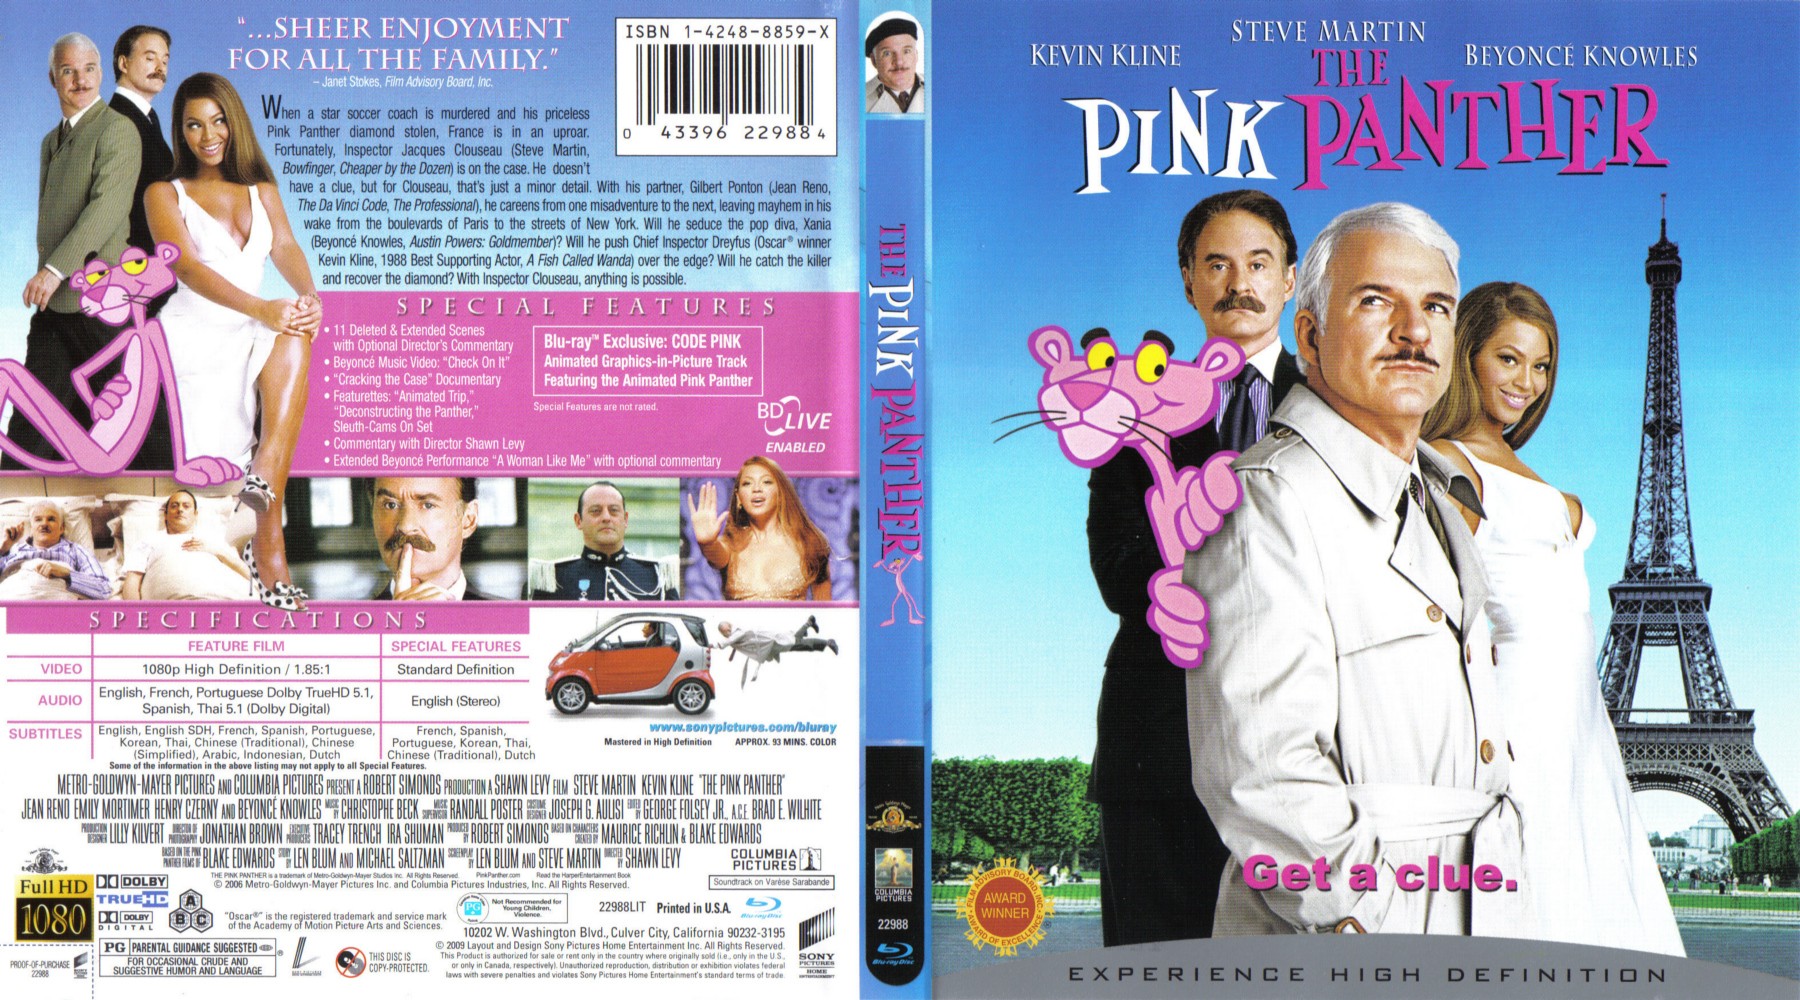 Jaquette DVD The pink panther - La panthre rose (2006) Zone 1 (BLU-RAY)